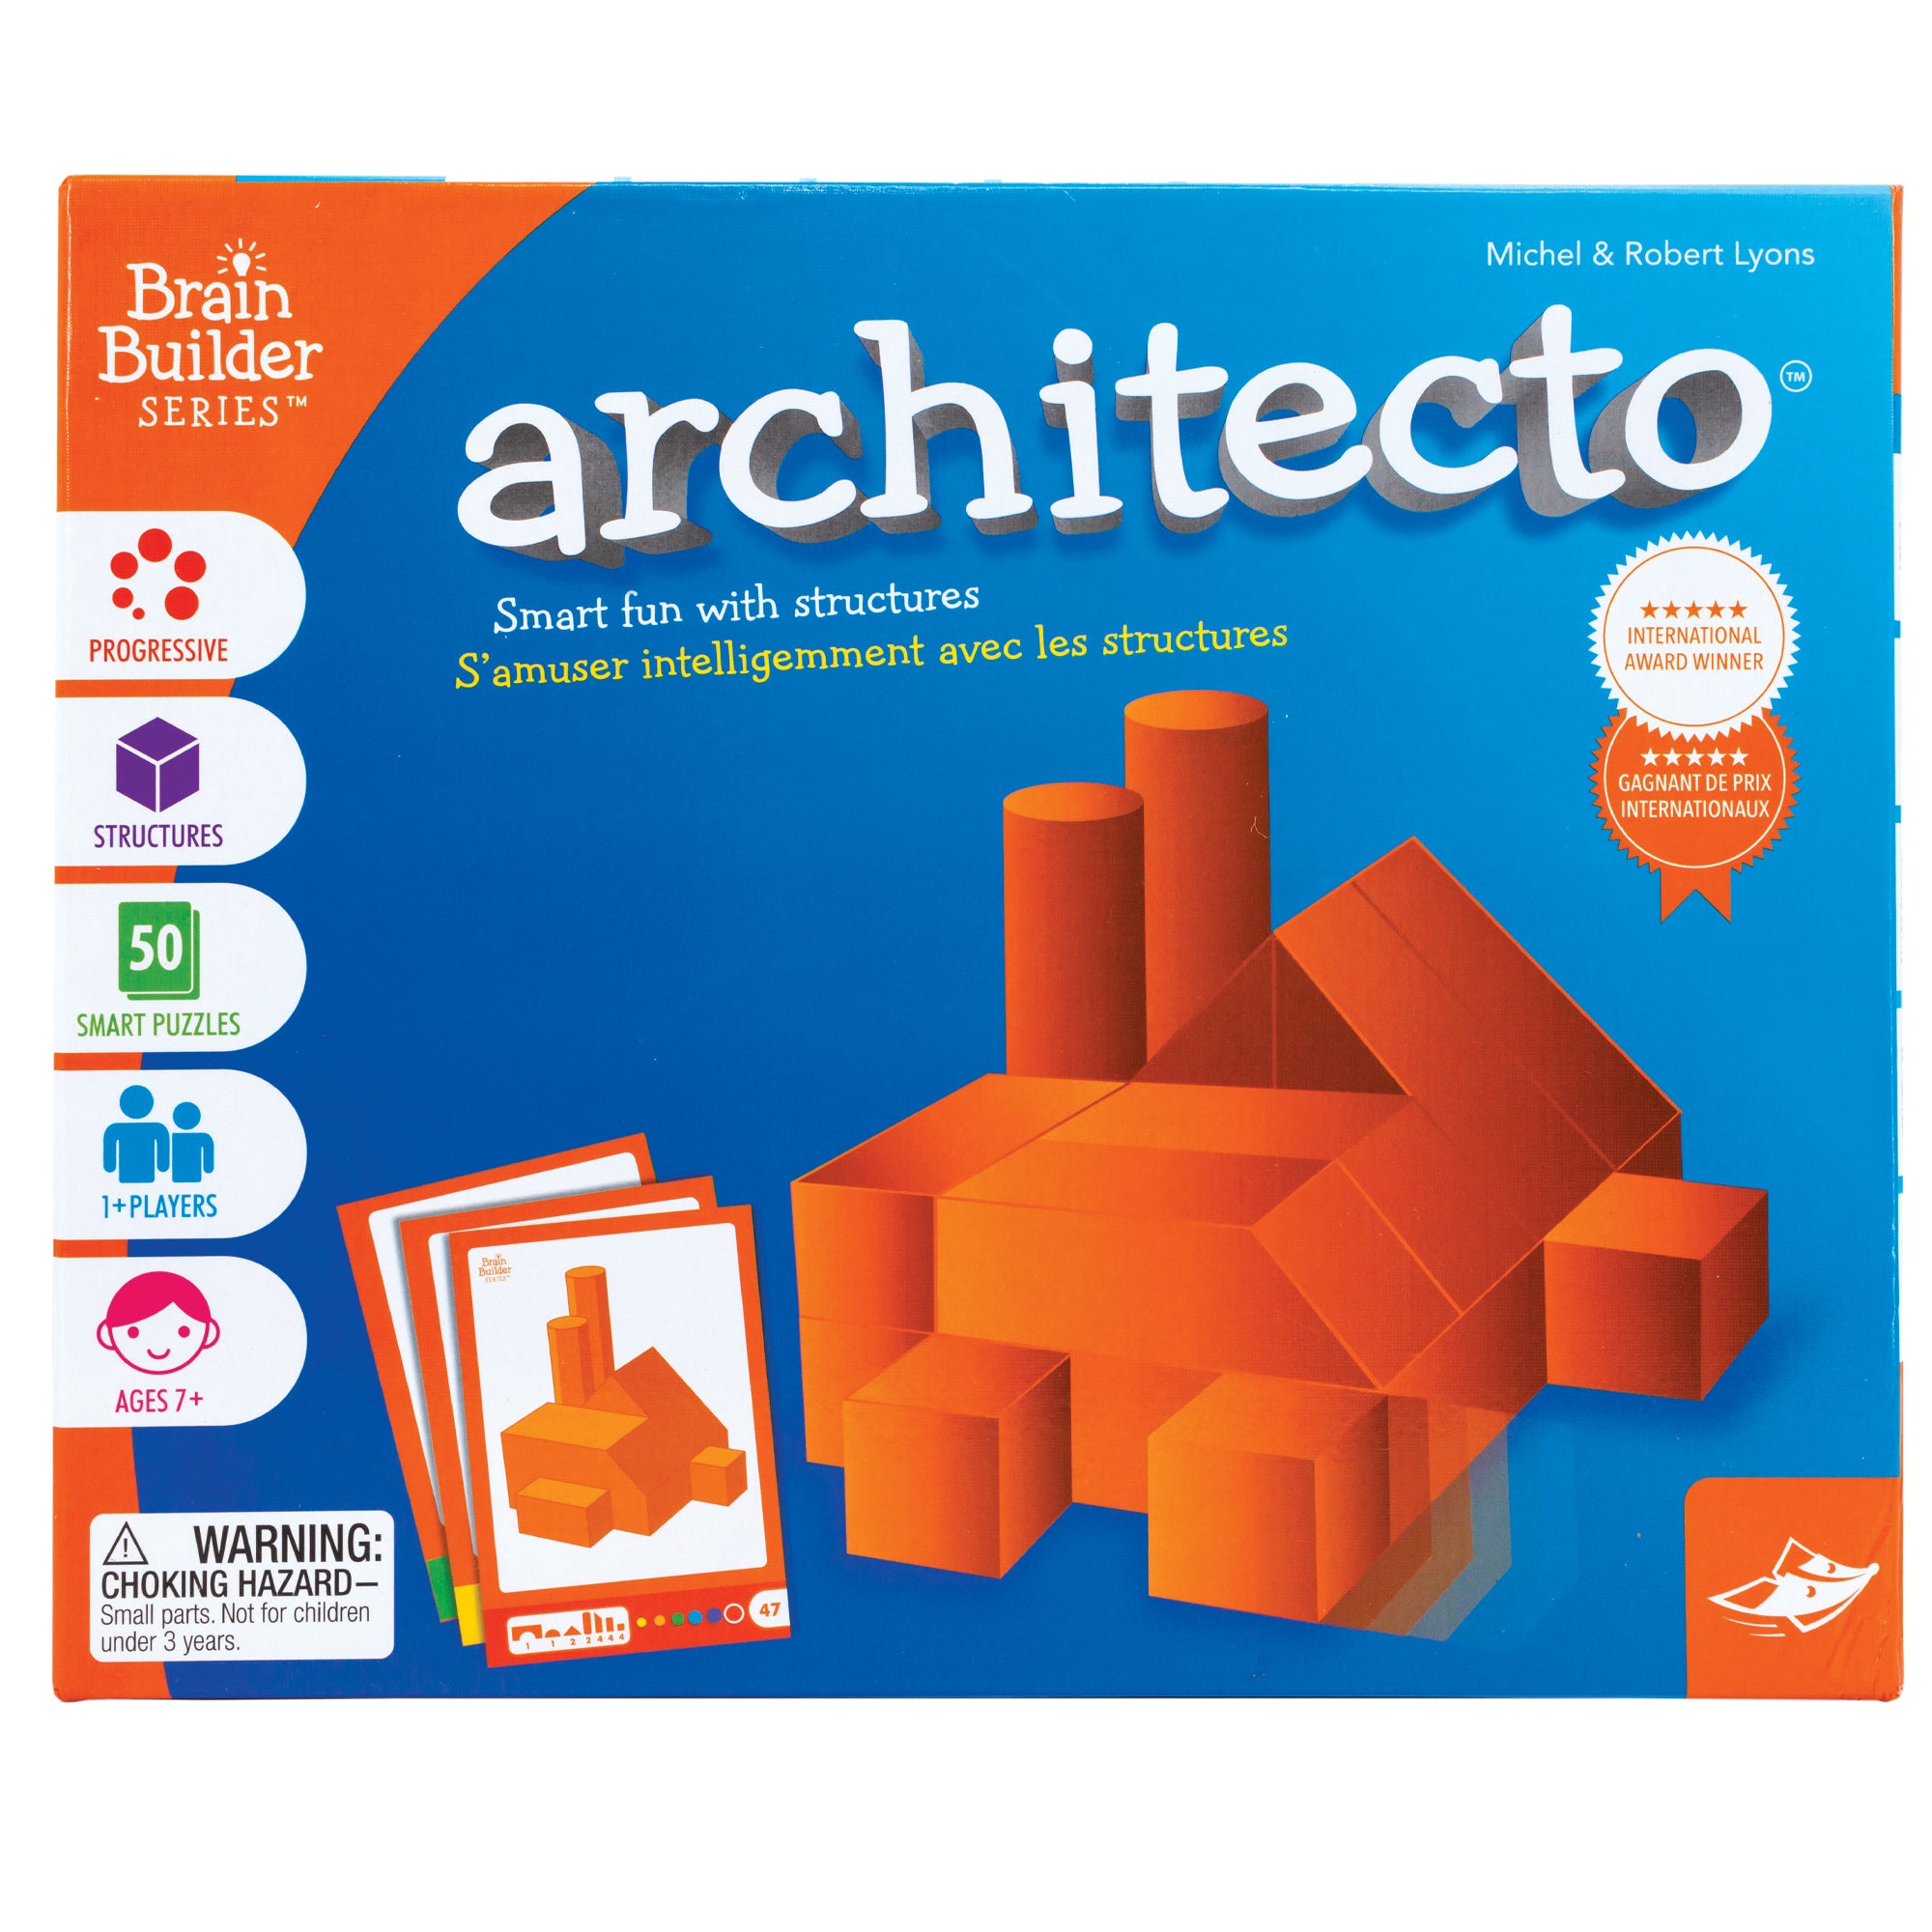 The Architecto game box cover background is mostly blue with a curved orange border on the left. The illustration in the middle is a structure created from the Architecto pieces. It looks like a factory with square pieces at the bottom, triangle pieces stacked on top, and 2 cylindrical pieces in the back left. There are 3 challenges fanned out to the left. The only visible card on top shows the structure on the box. Text reads “progressive, structure, 50 smart puzzles, 1 + players, ages 7 +.”